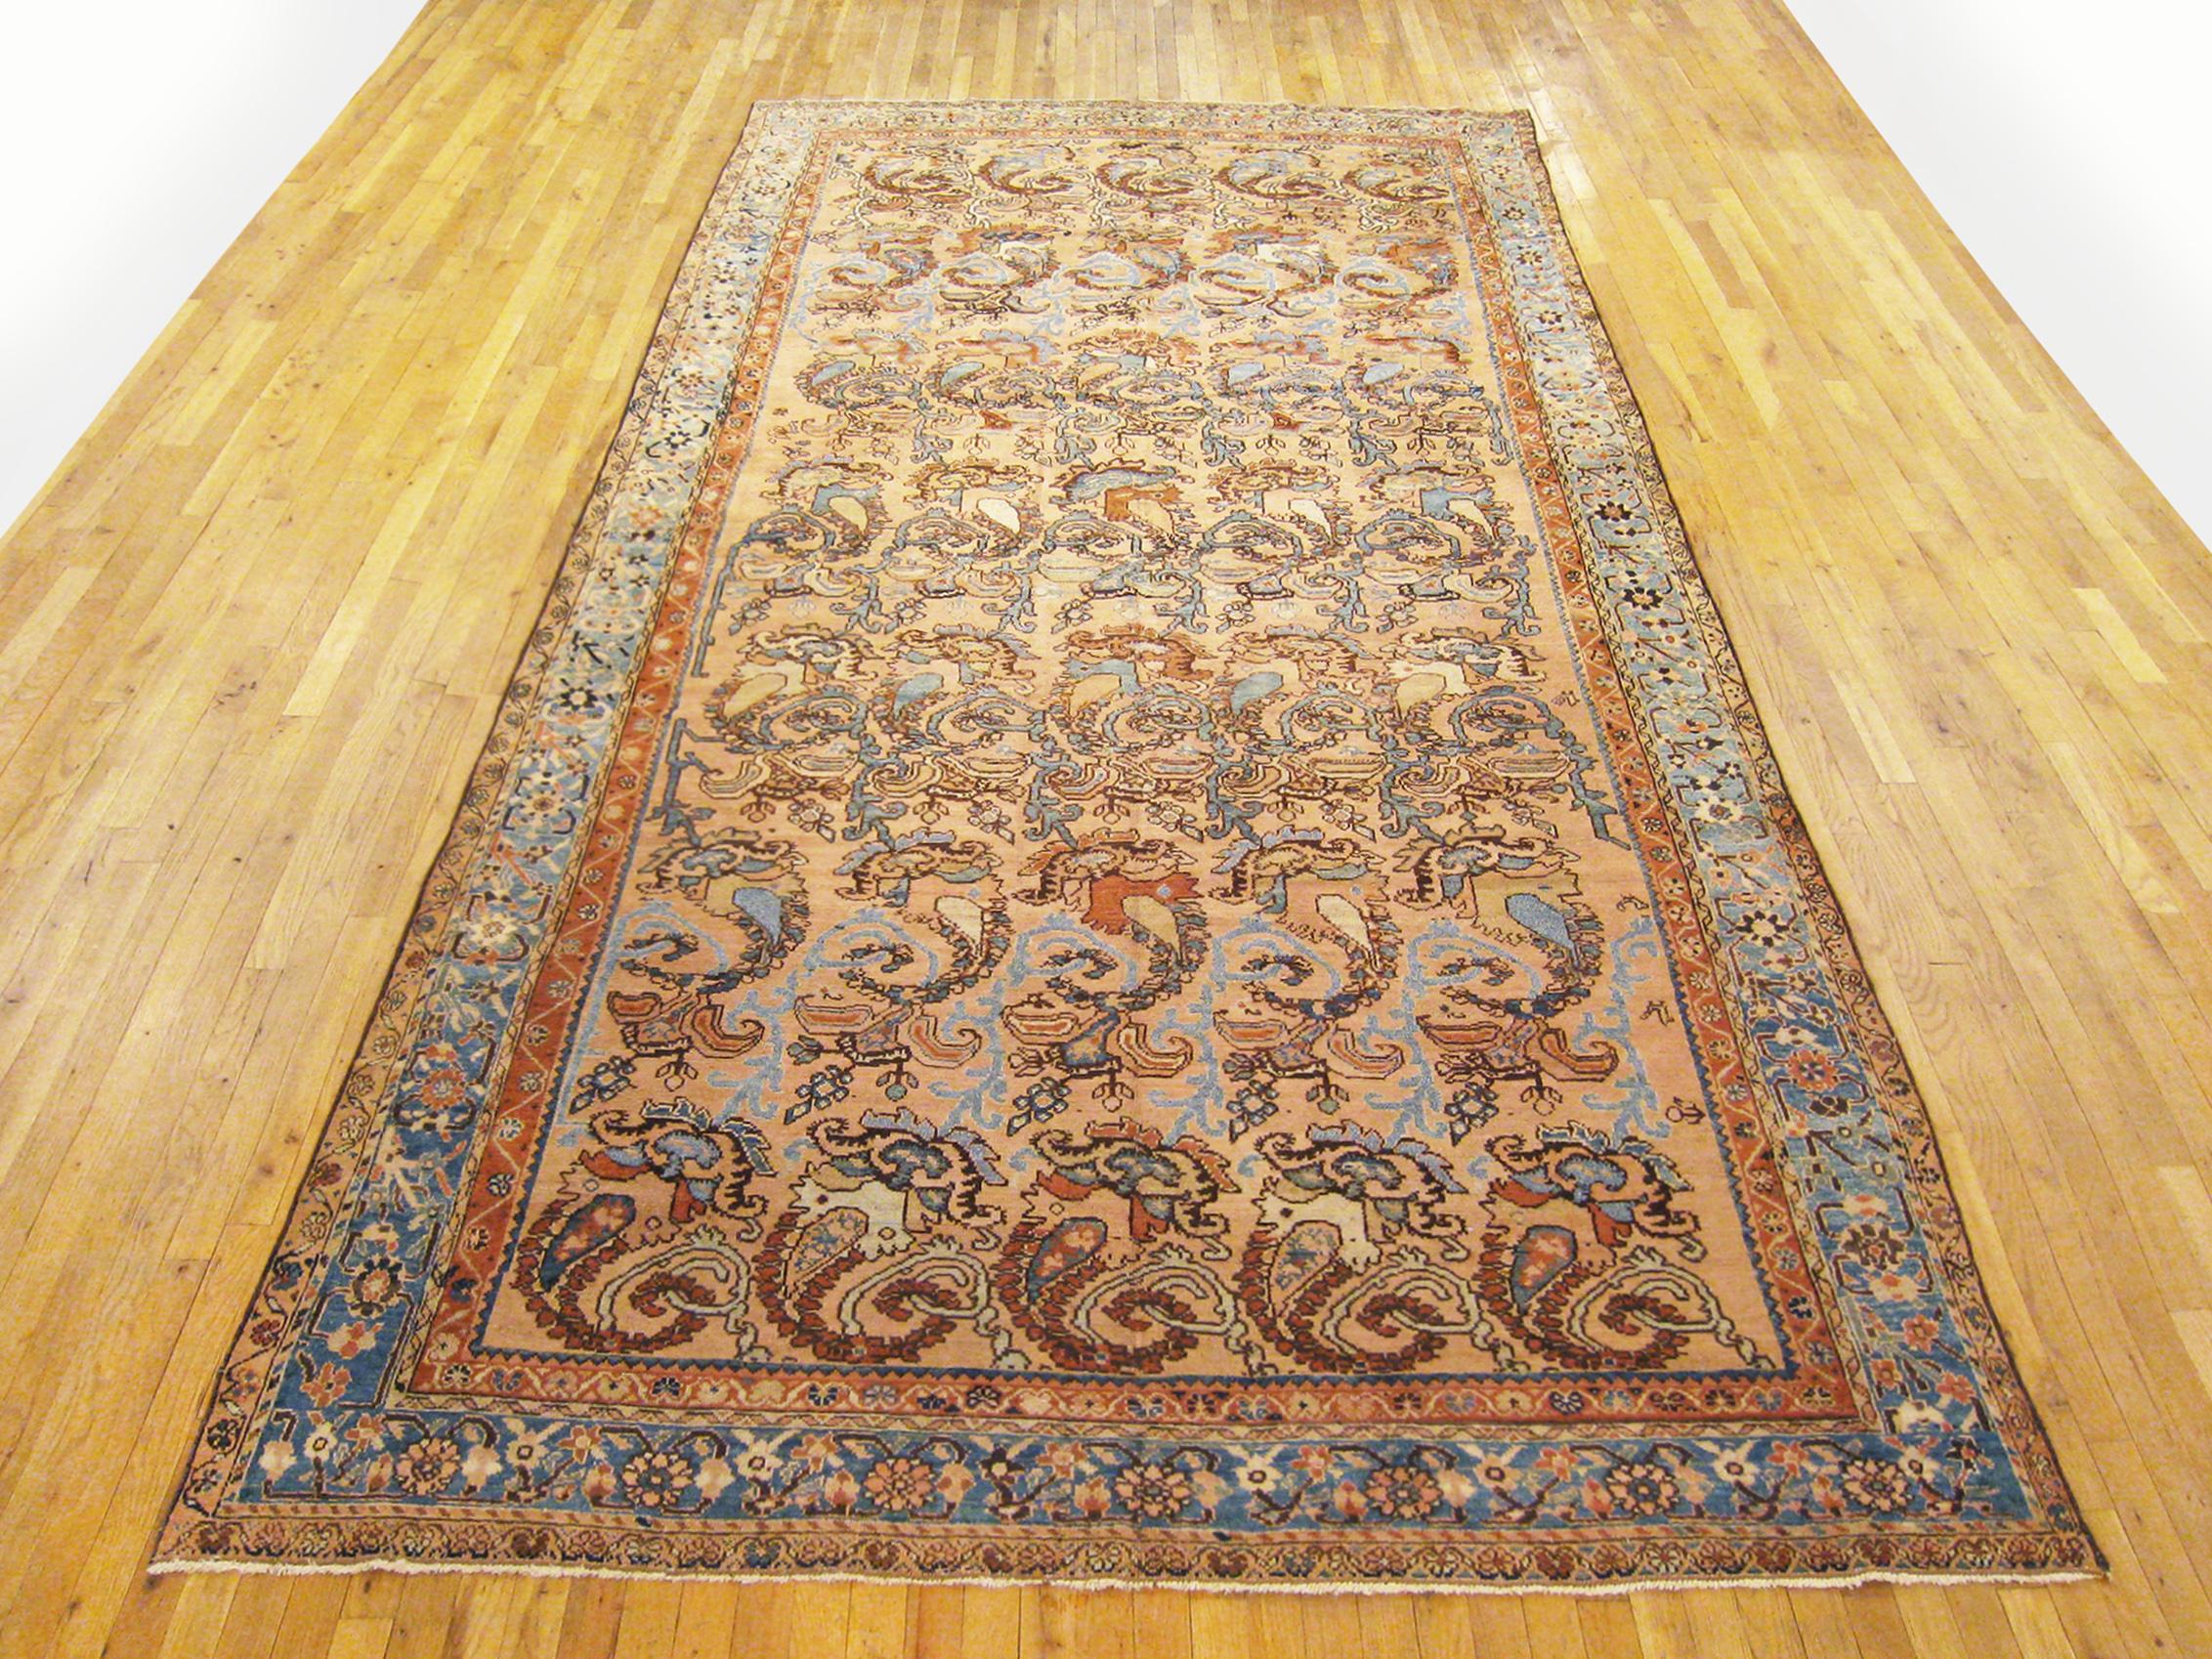 Antique Persian N. W. Persia rug, runner size, circa 1910

An antique N.W. Persia oriental rug in runner size, size 13'5 x 6'10, circa 1910. This handsome hand-made carpet features a Paisley design allover the rose central field. The field is